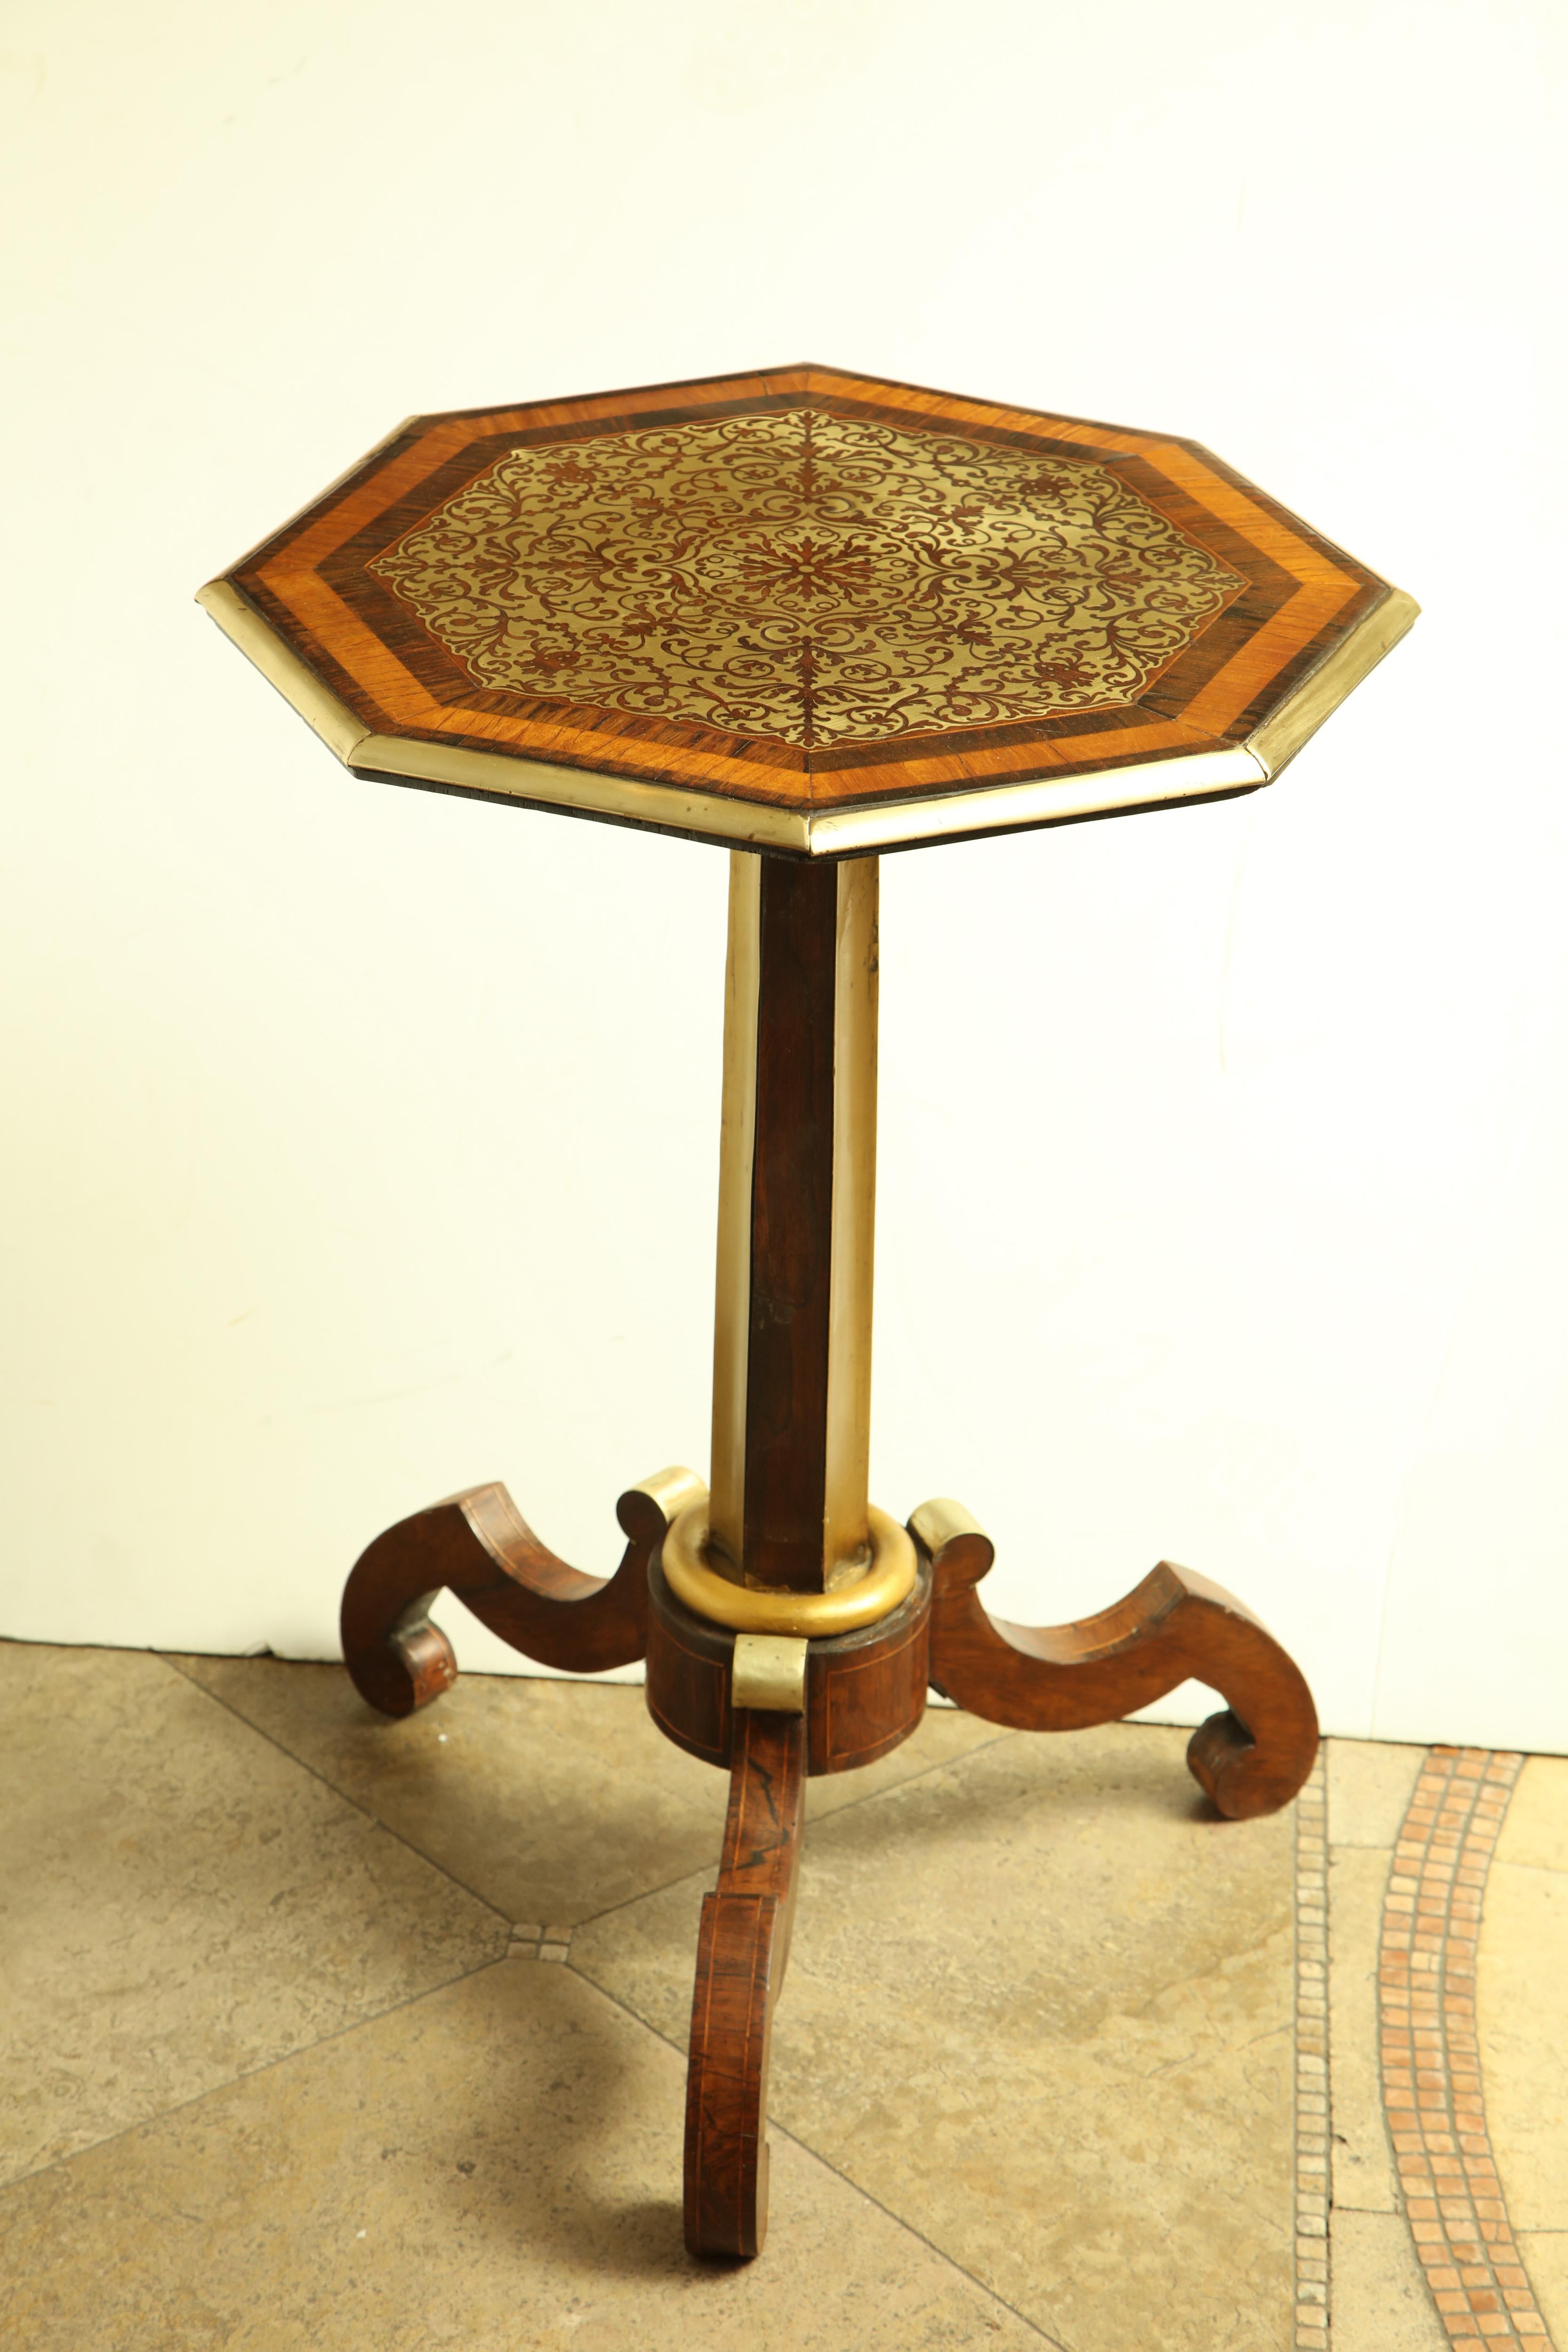 A fine Regency brass inlaid mahogany pedestal side table with an elaborately inlaid octagonal top and with gilt accents.